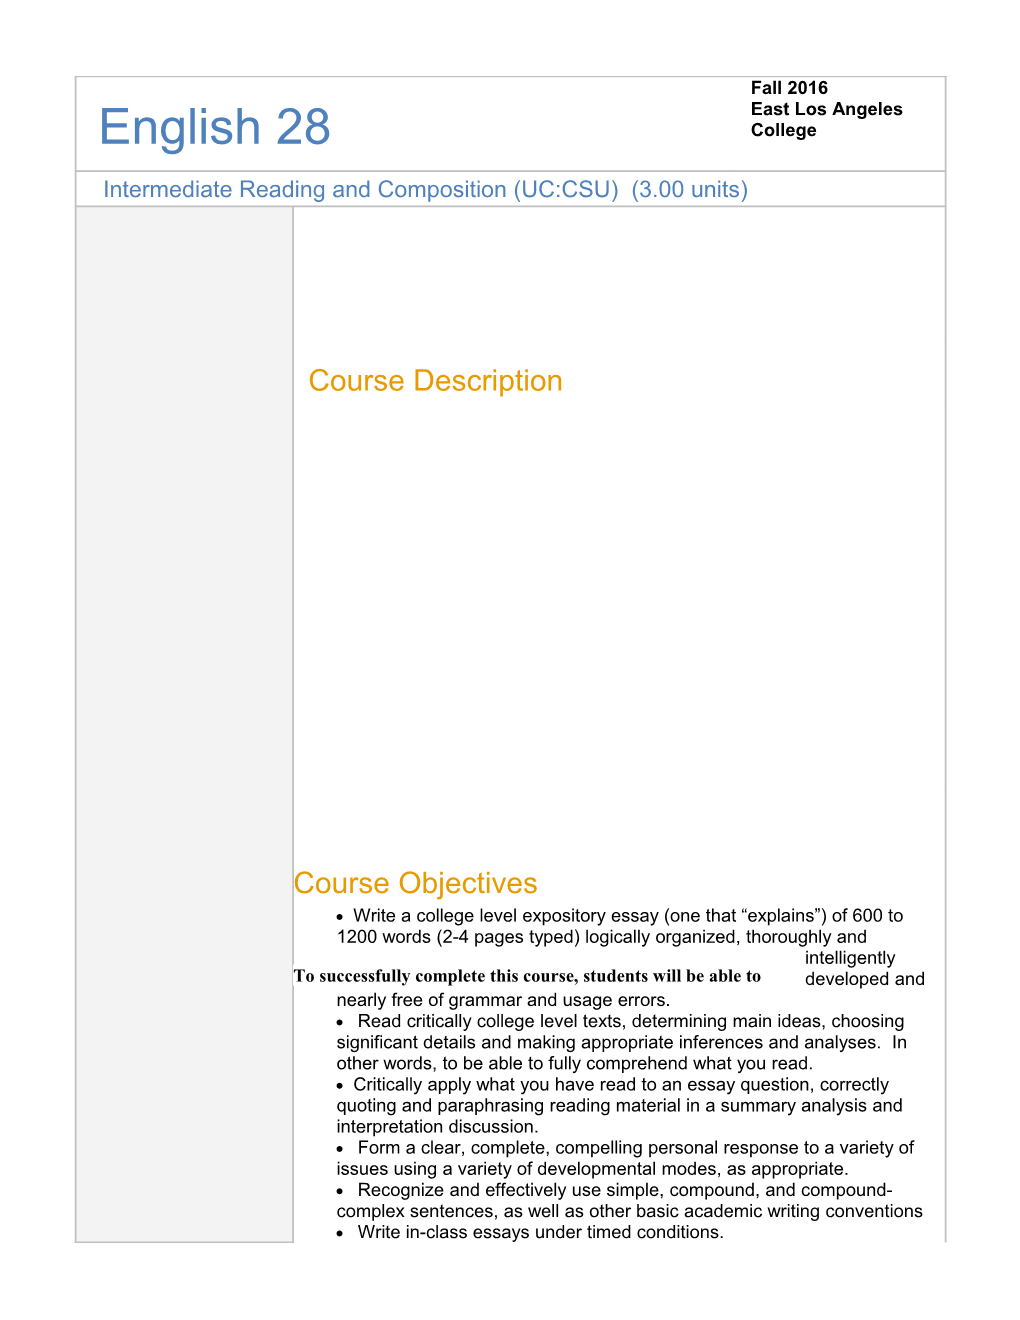 Intermediate Reading and Composition (UC:CSU) (3.00 Units)